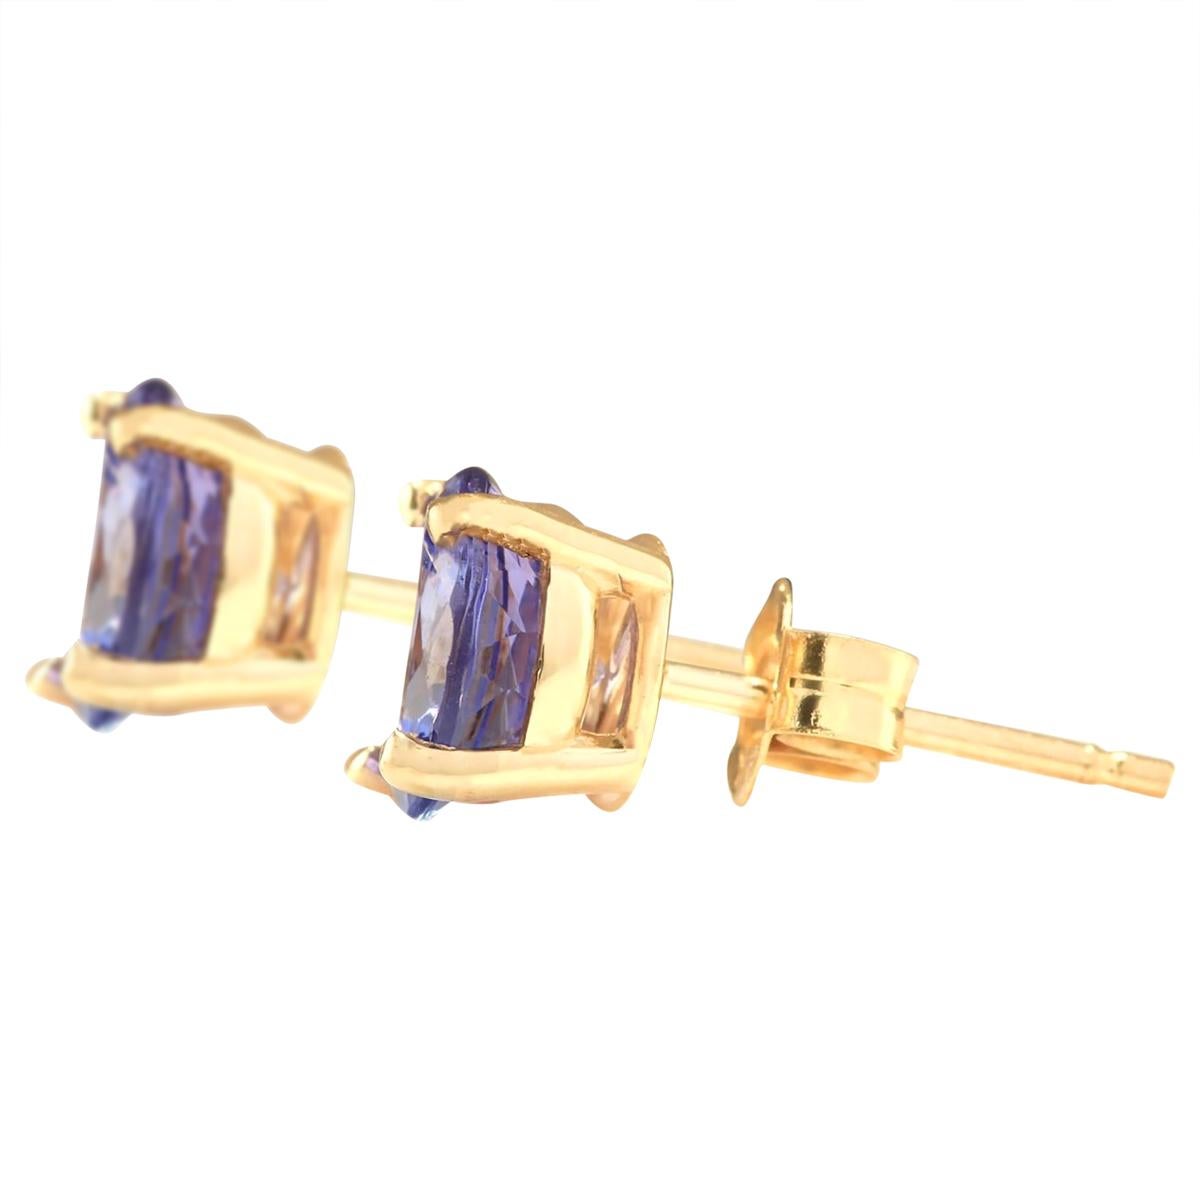 Introducing our stunning 2.30 Carat Natural Tanzanite Earrings, crafted with finesse in 14K Yellow Gold. Each earring bears the authentic 14K stamp and weighs a mere 1.2 grams, ensuring comfort and elegance. The captivating tanzanite gemstones,